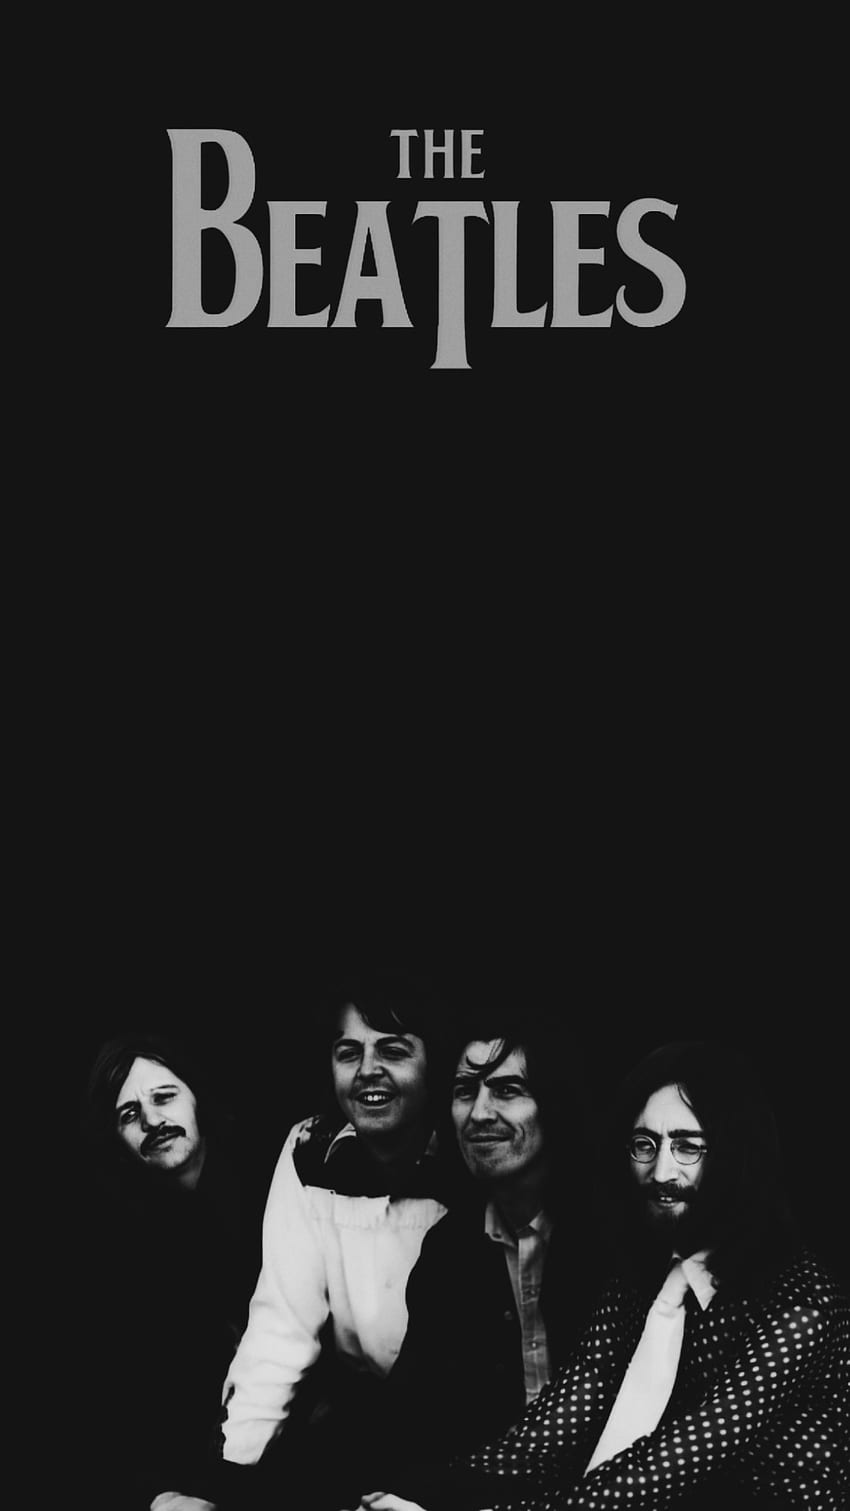 the beatles HD wallpapers backgrounds